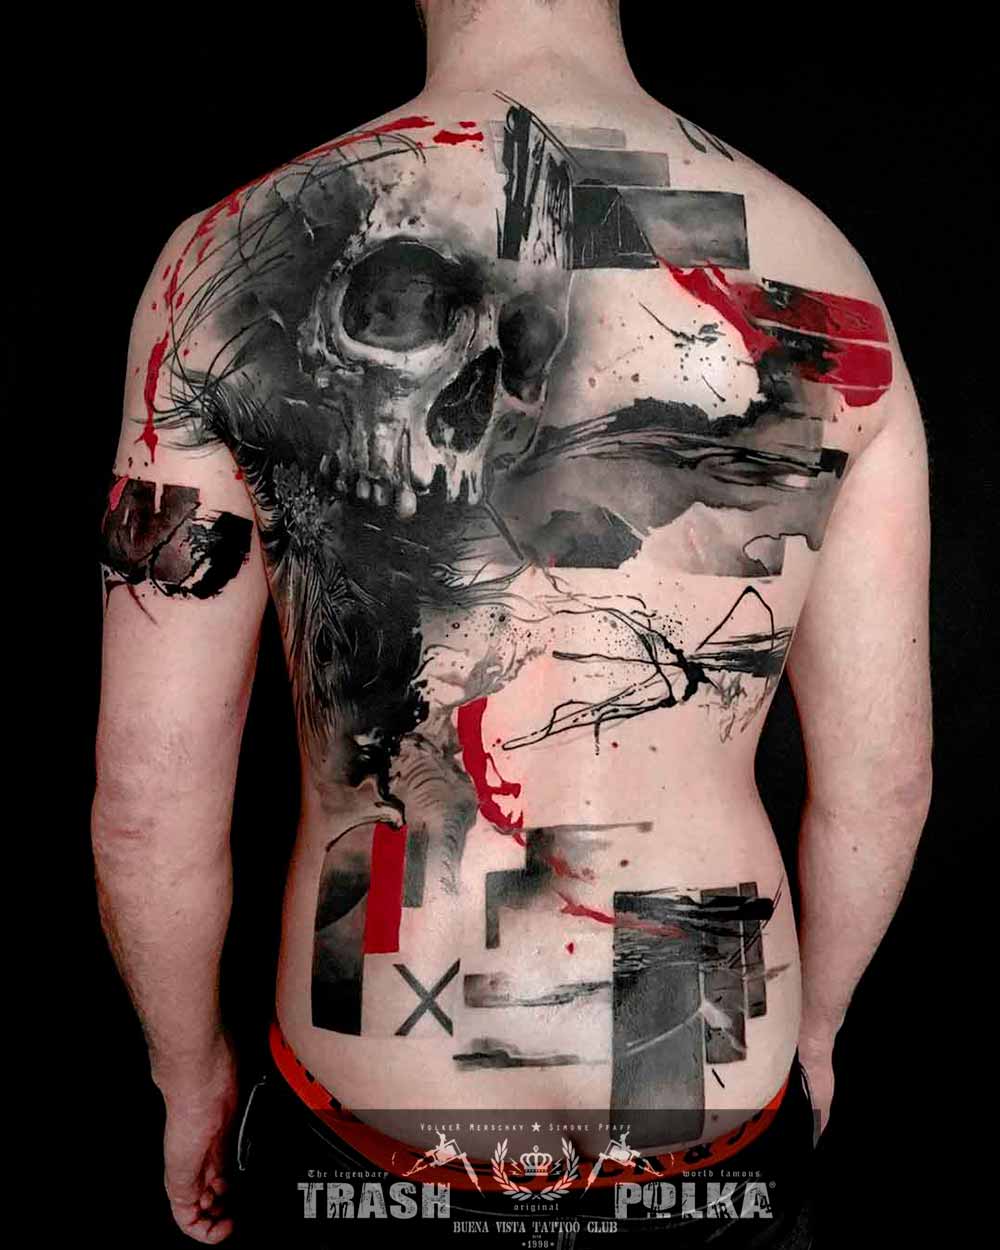 a complete back tattoo in trash polka style a skull with feathers a memento mori pic